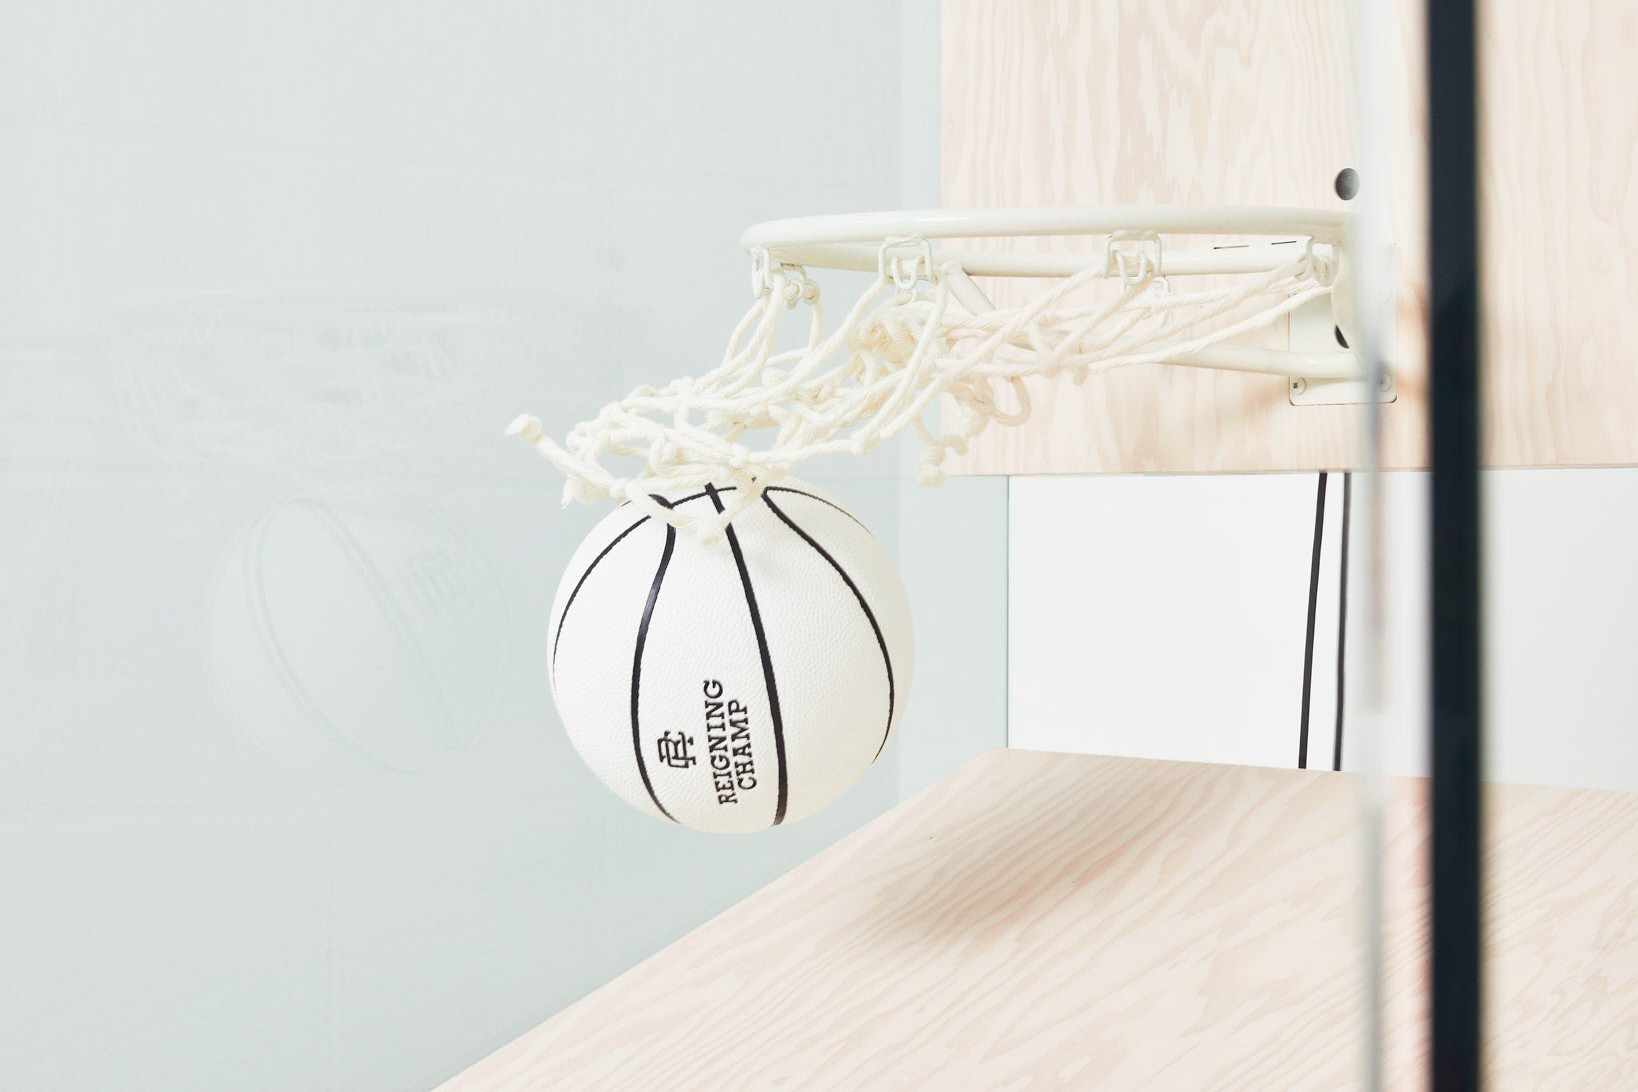 Reigning Champ's $50,000 basketball arcade game, made of natural hardwood & including a white basketball